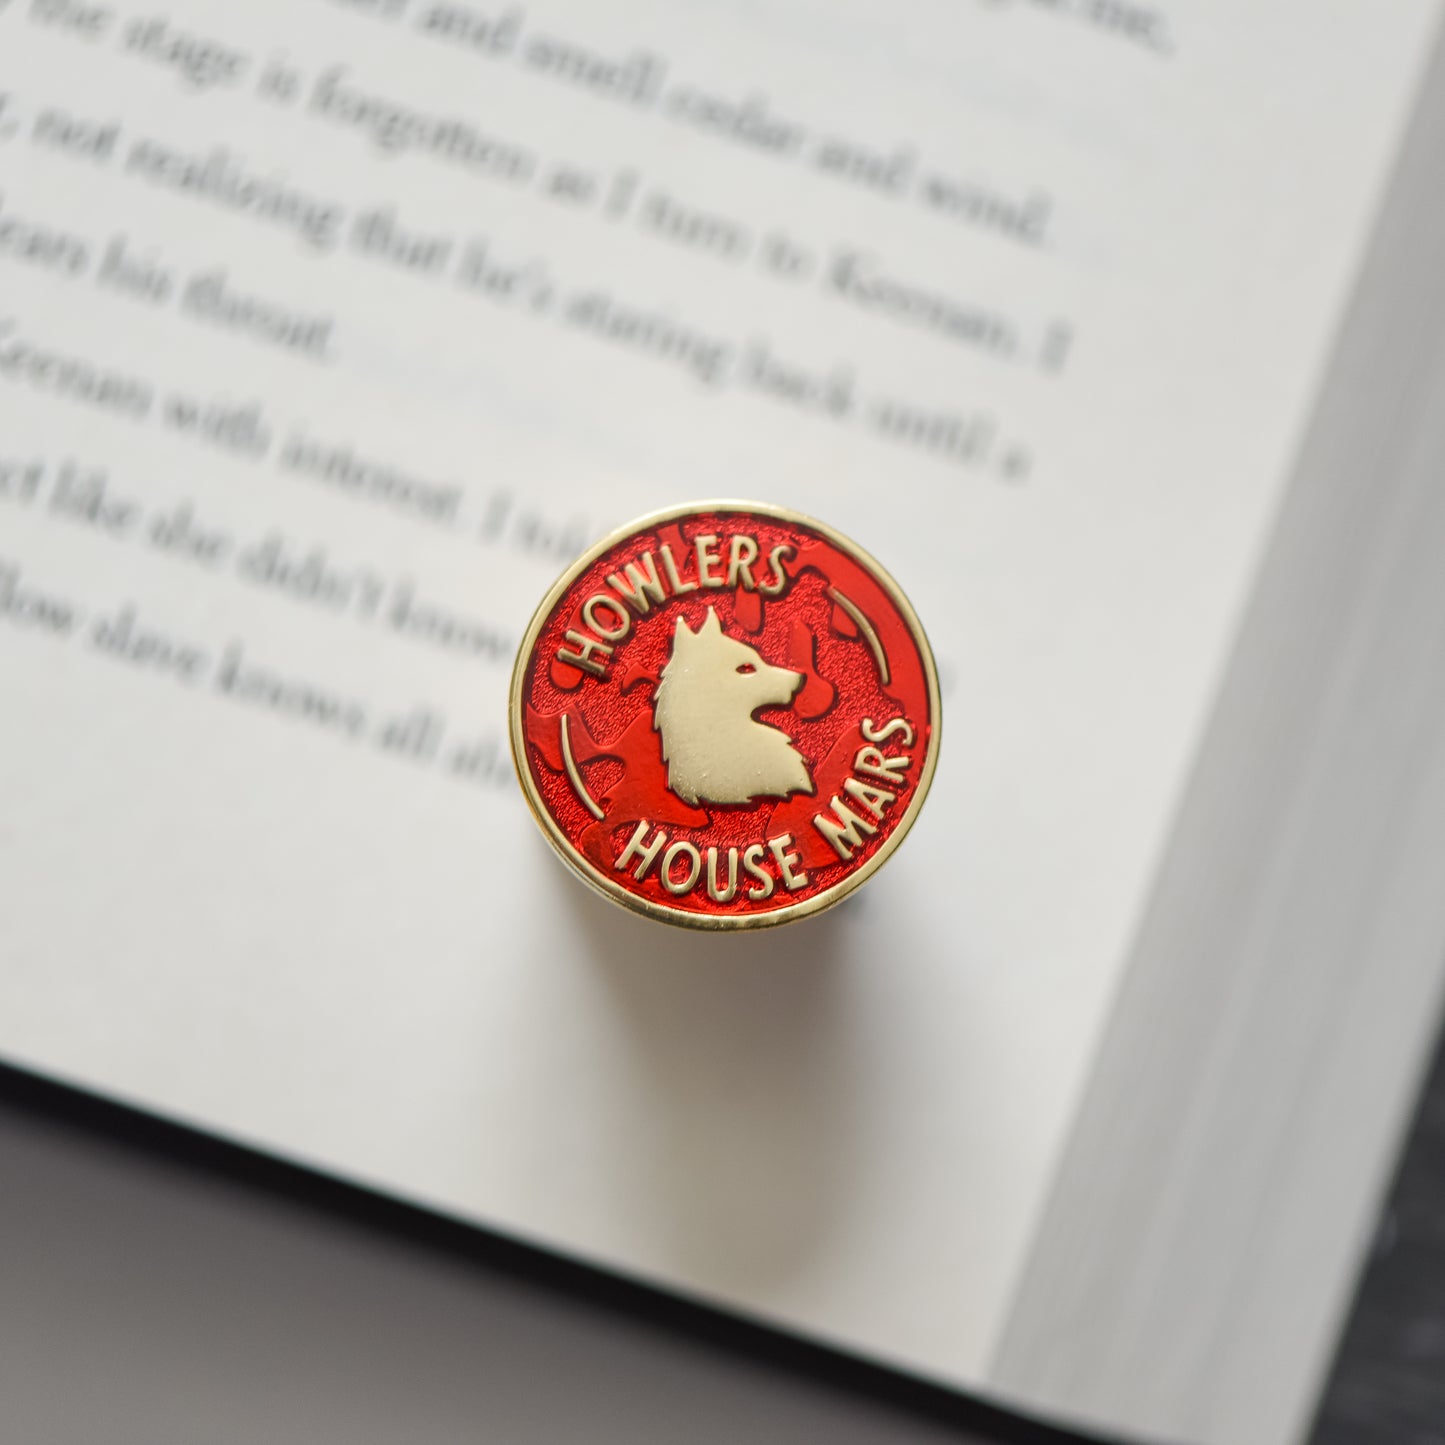 Red and gold circle membership style enamel pin with a wolf and howler house mars text